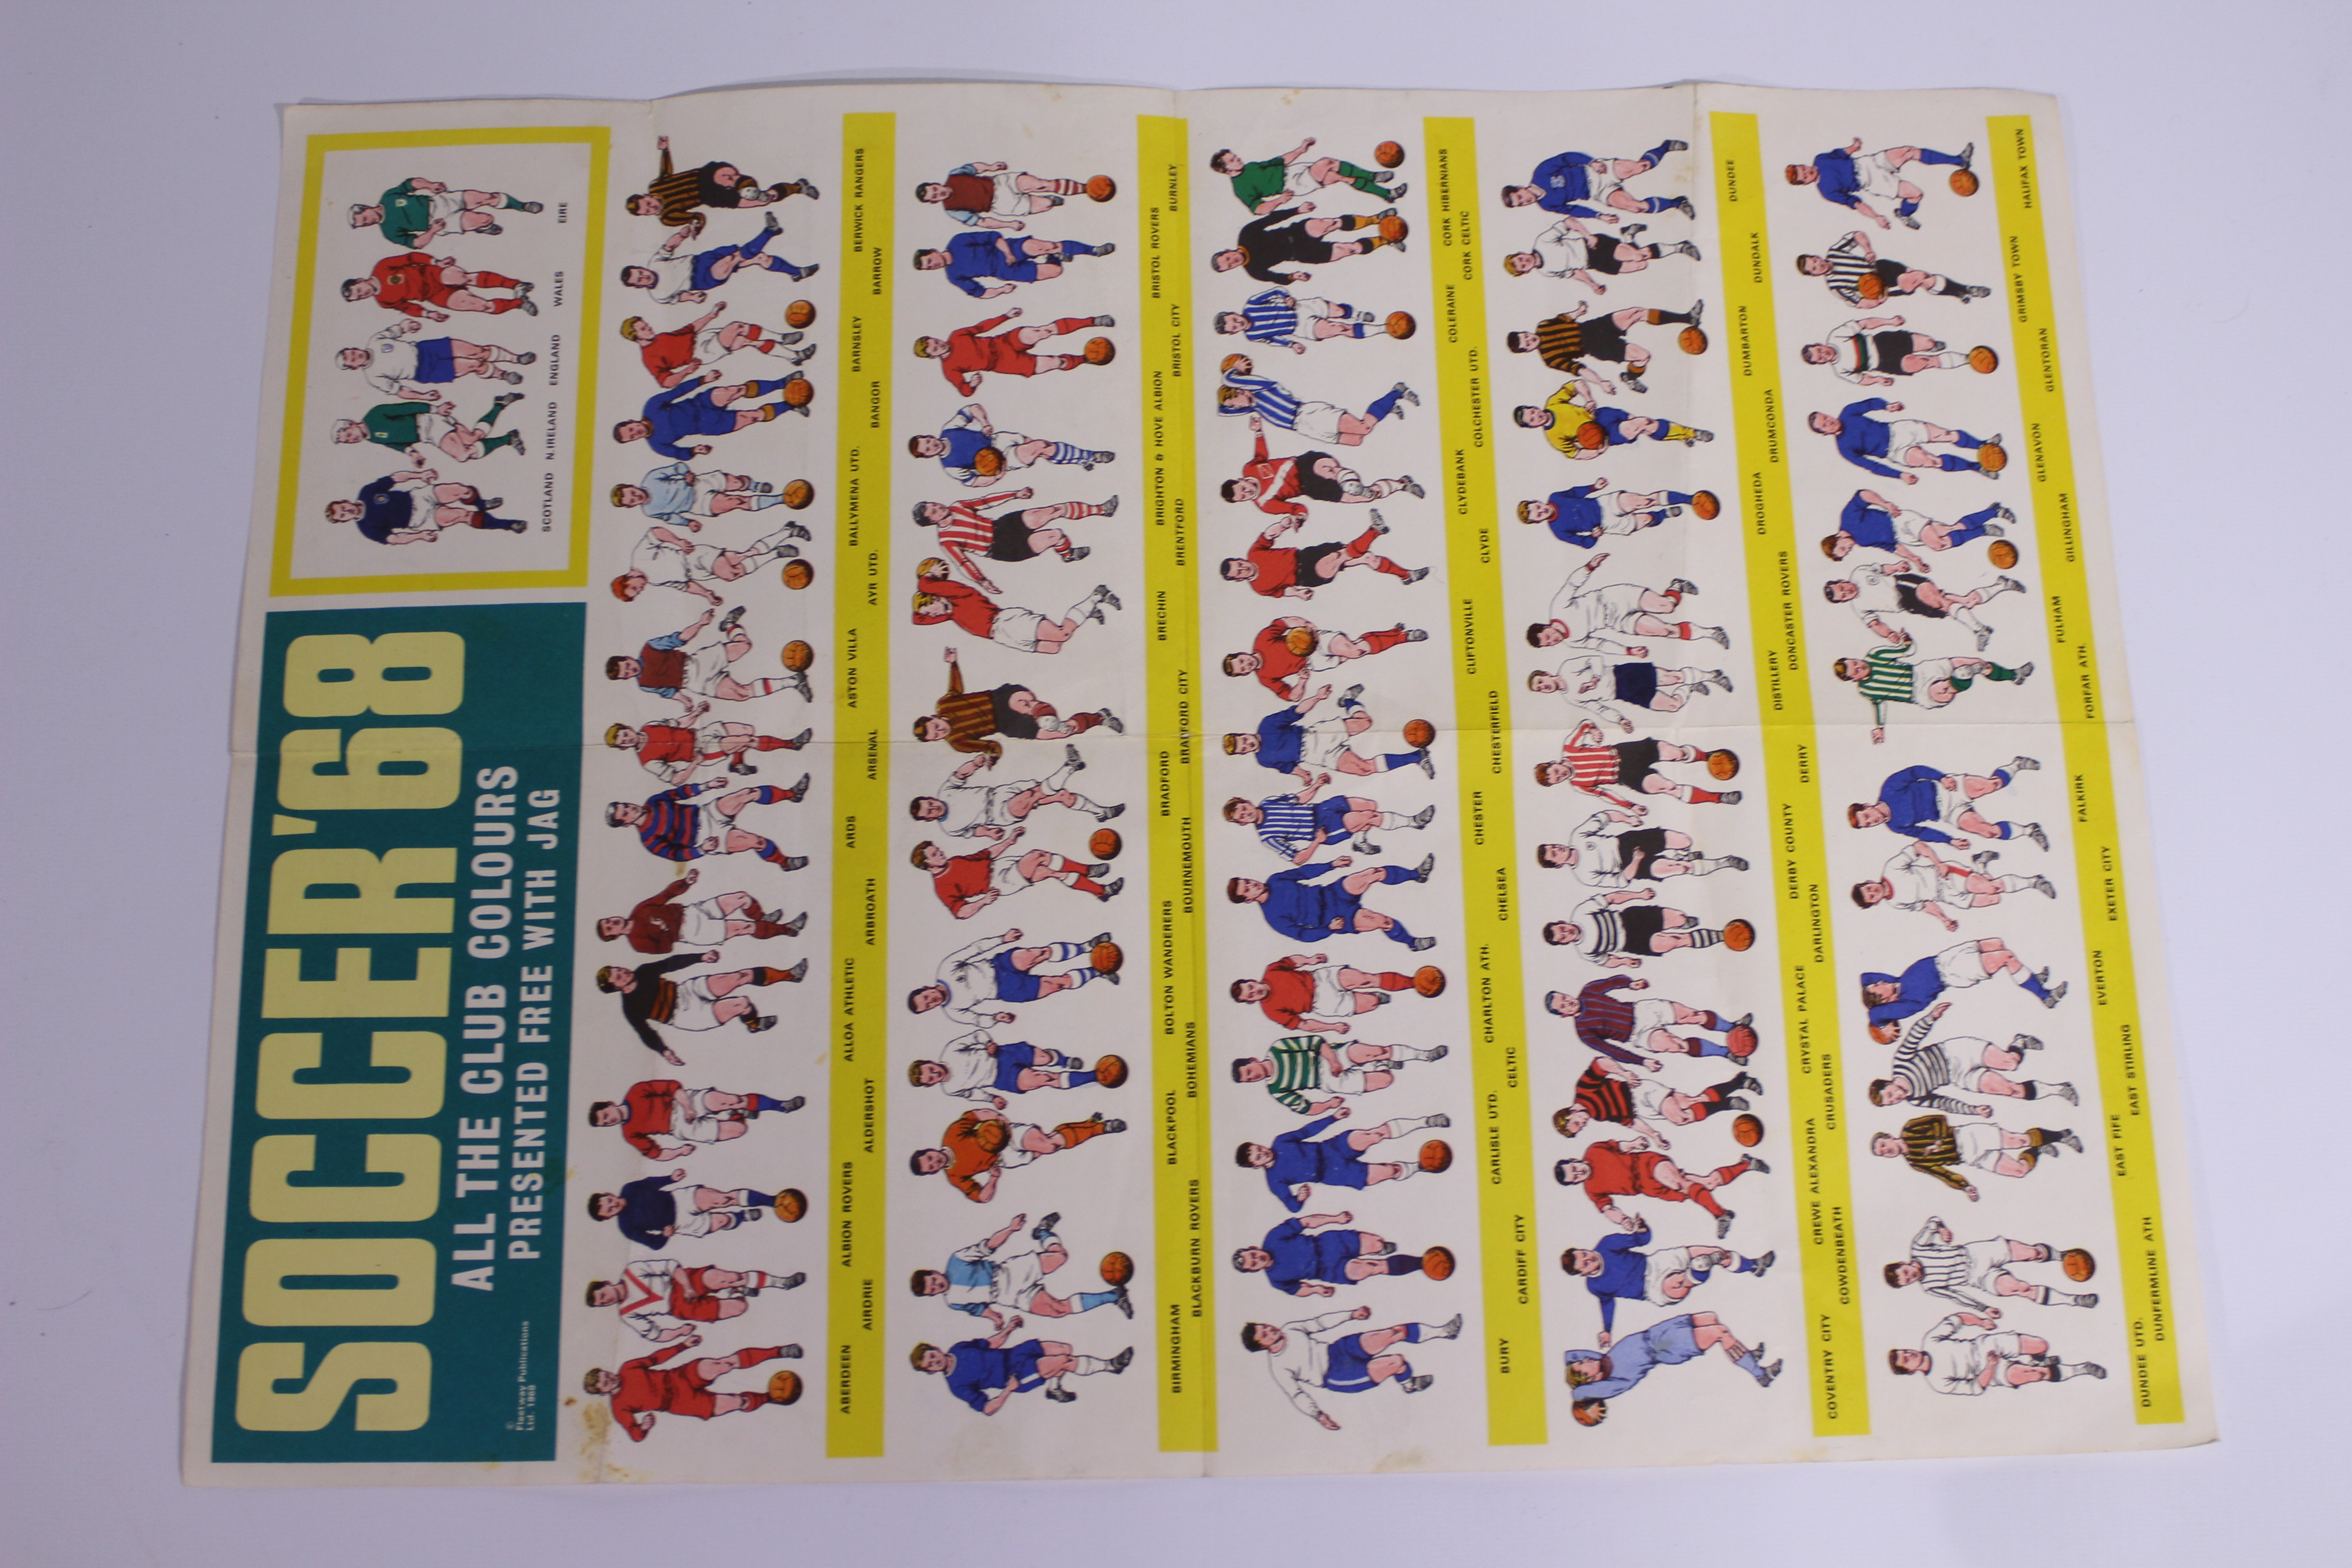 Football Poster, Soccer 68 all the club